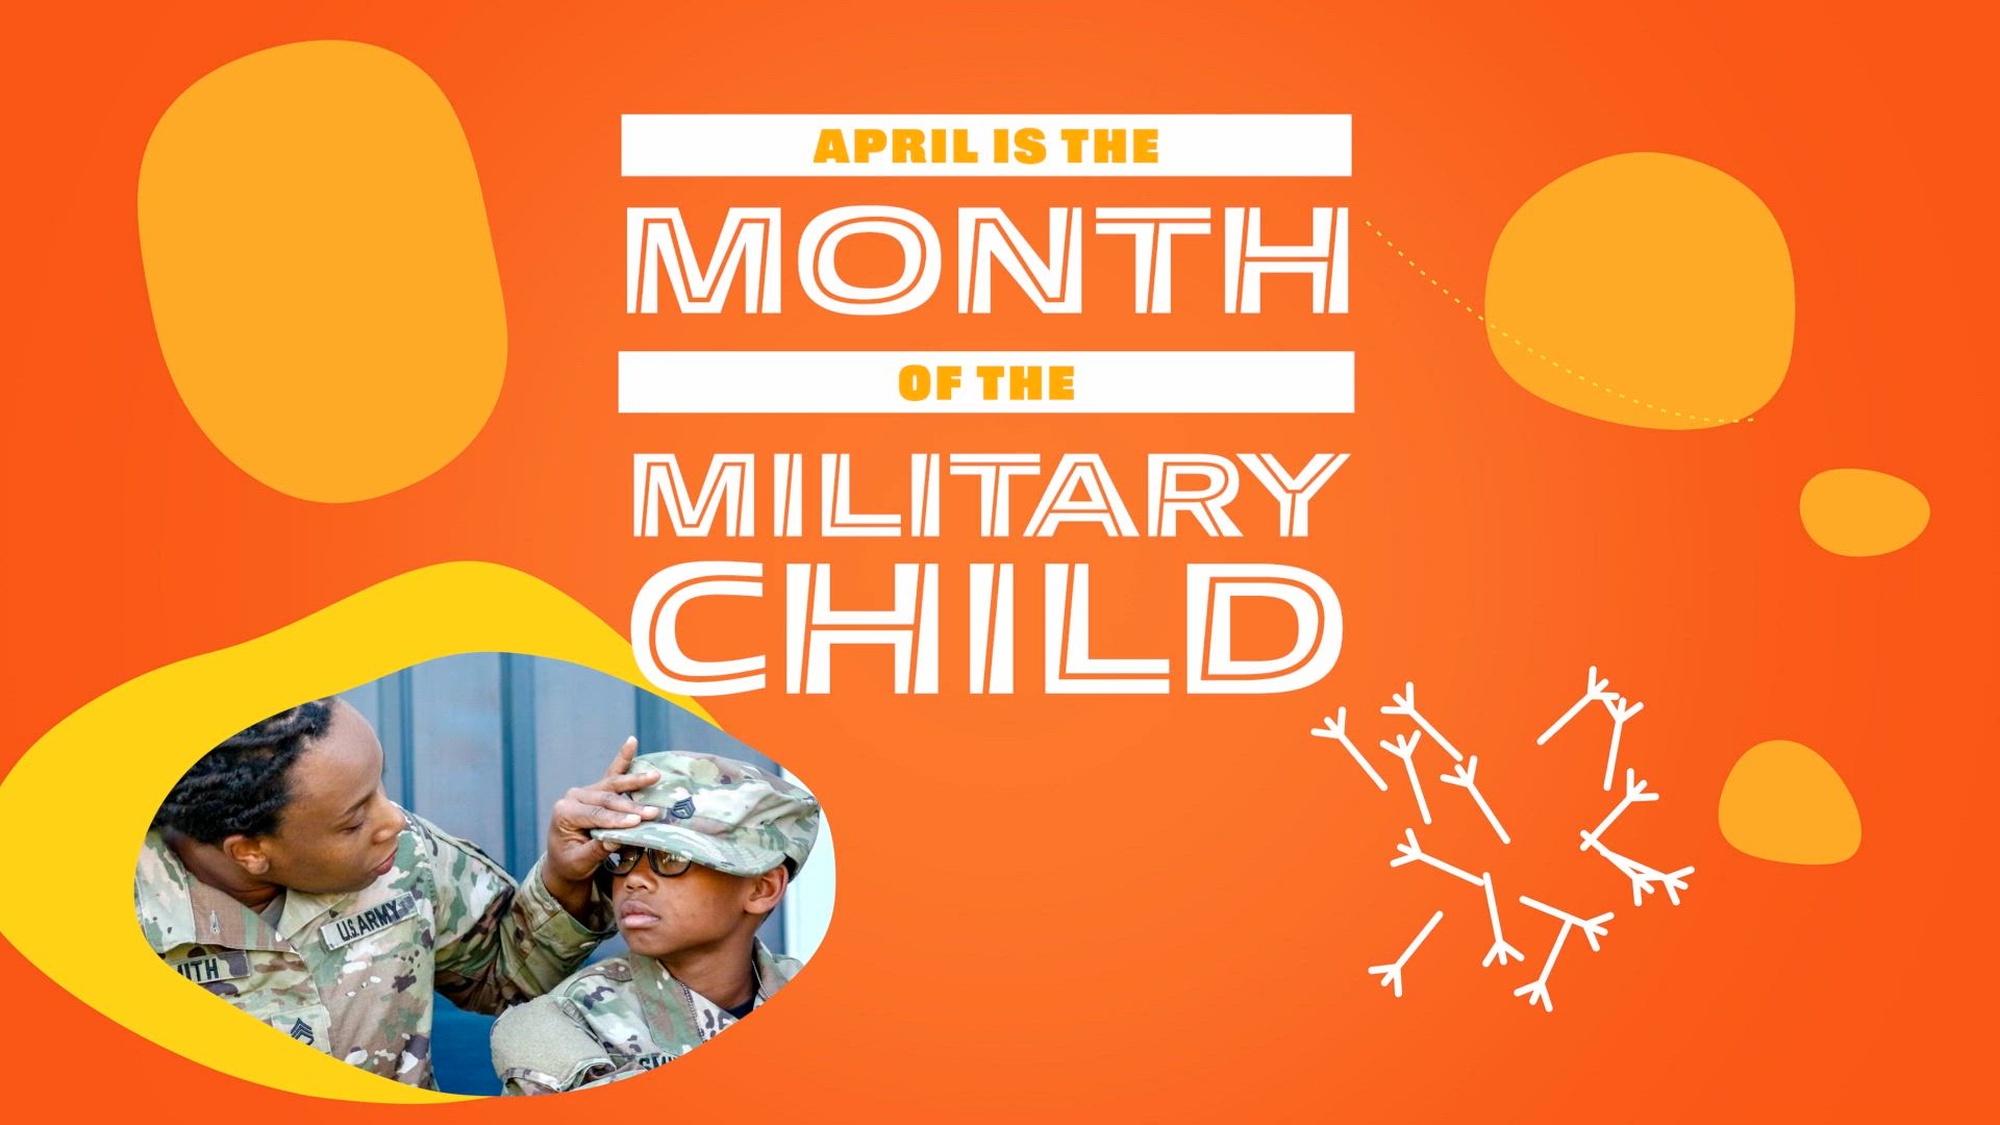 April is the Month of the Military Child! Check your local listings for celebrations and events. Pick up a Military Brat Patch, free from your Exchange, while supplies last. For details visit ShopMyExchange.com/MOMC